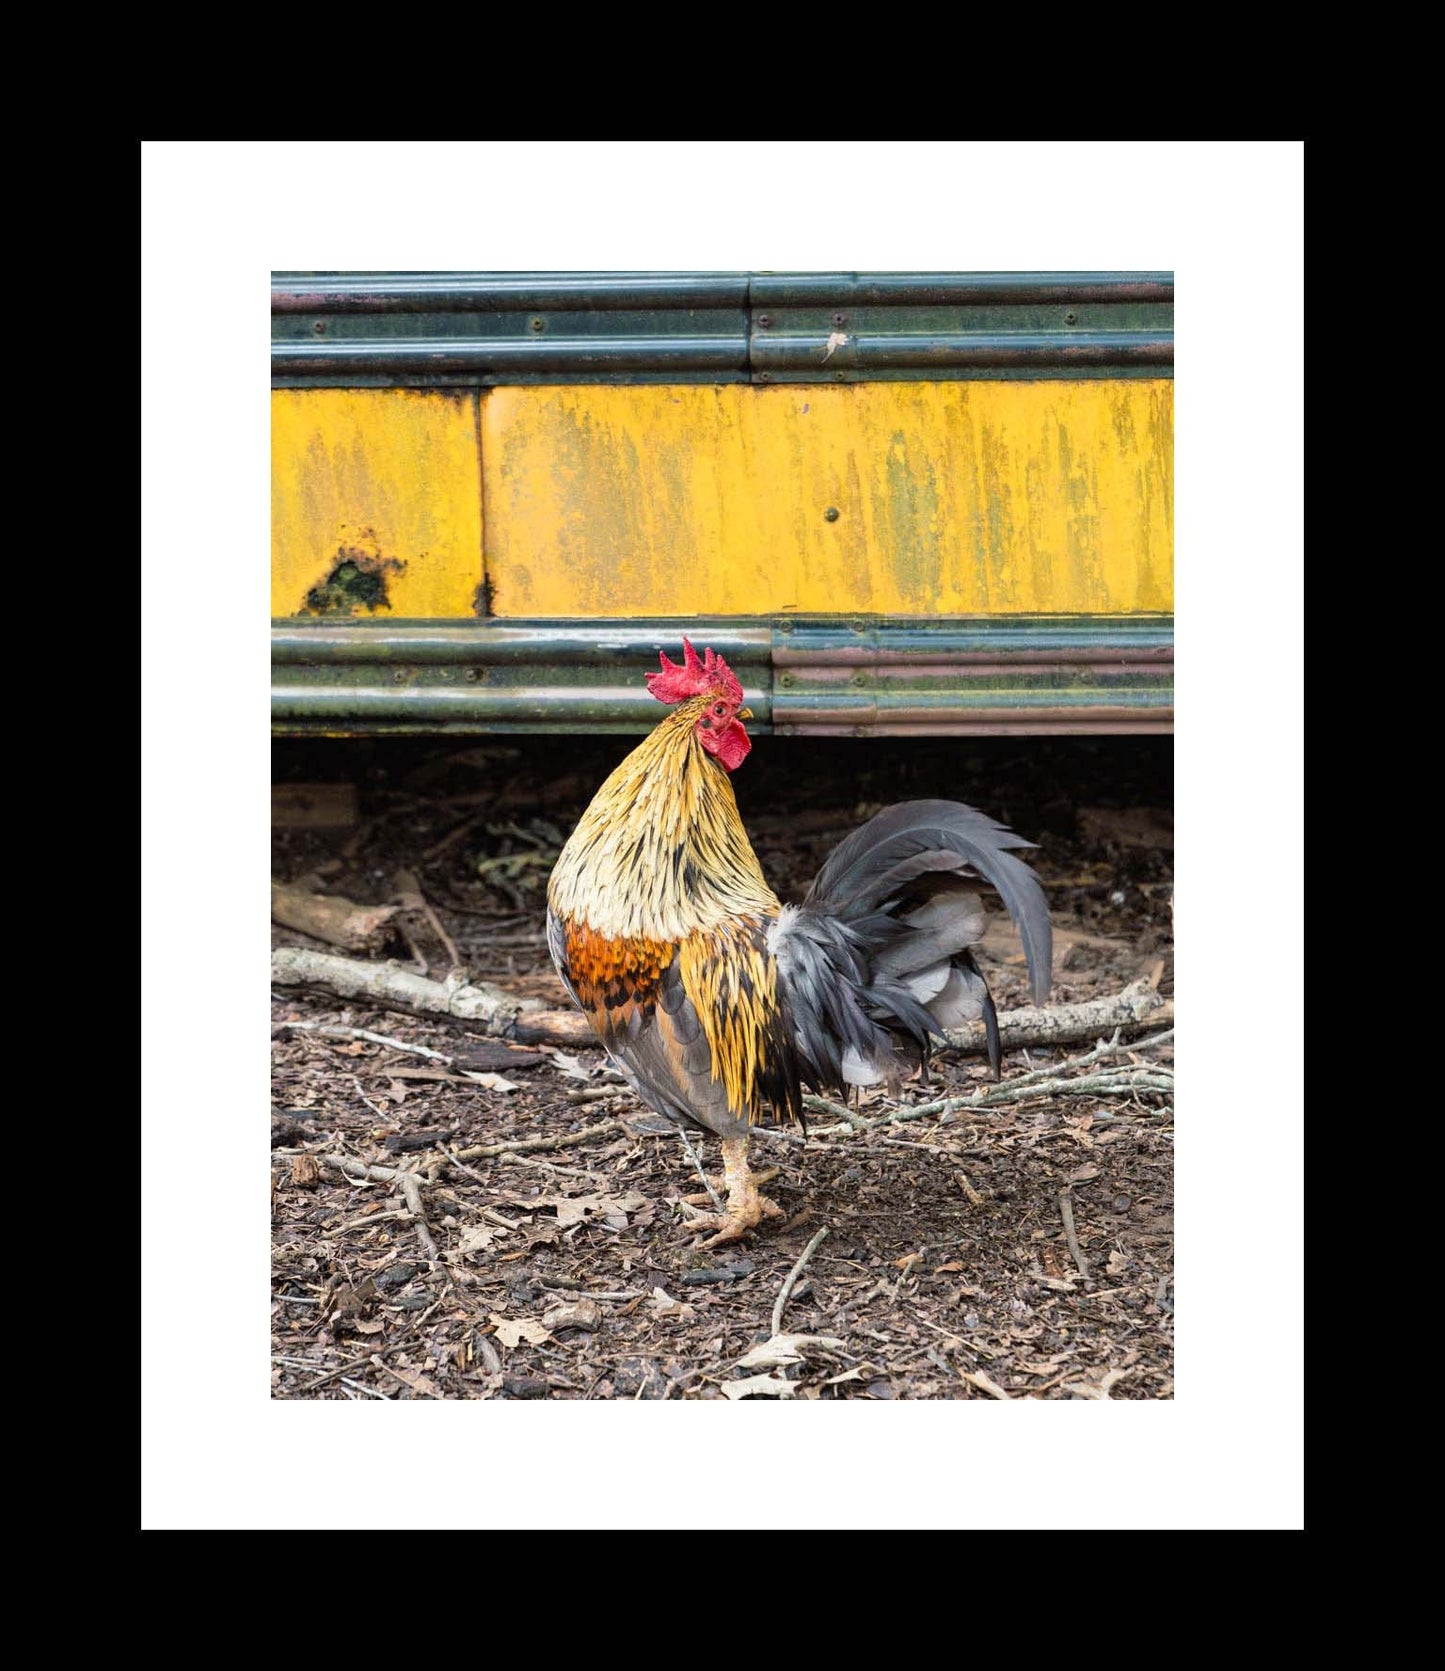 Rooster Photography Print, Rustic Farmhouse Prints, Canvas Wall Art, Country Decor, Unframed Photography Print - eireanneilis